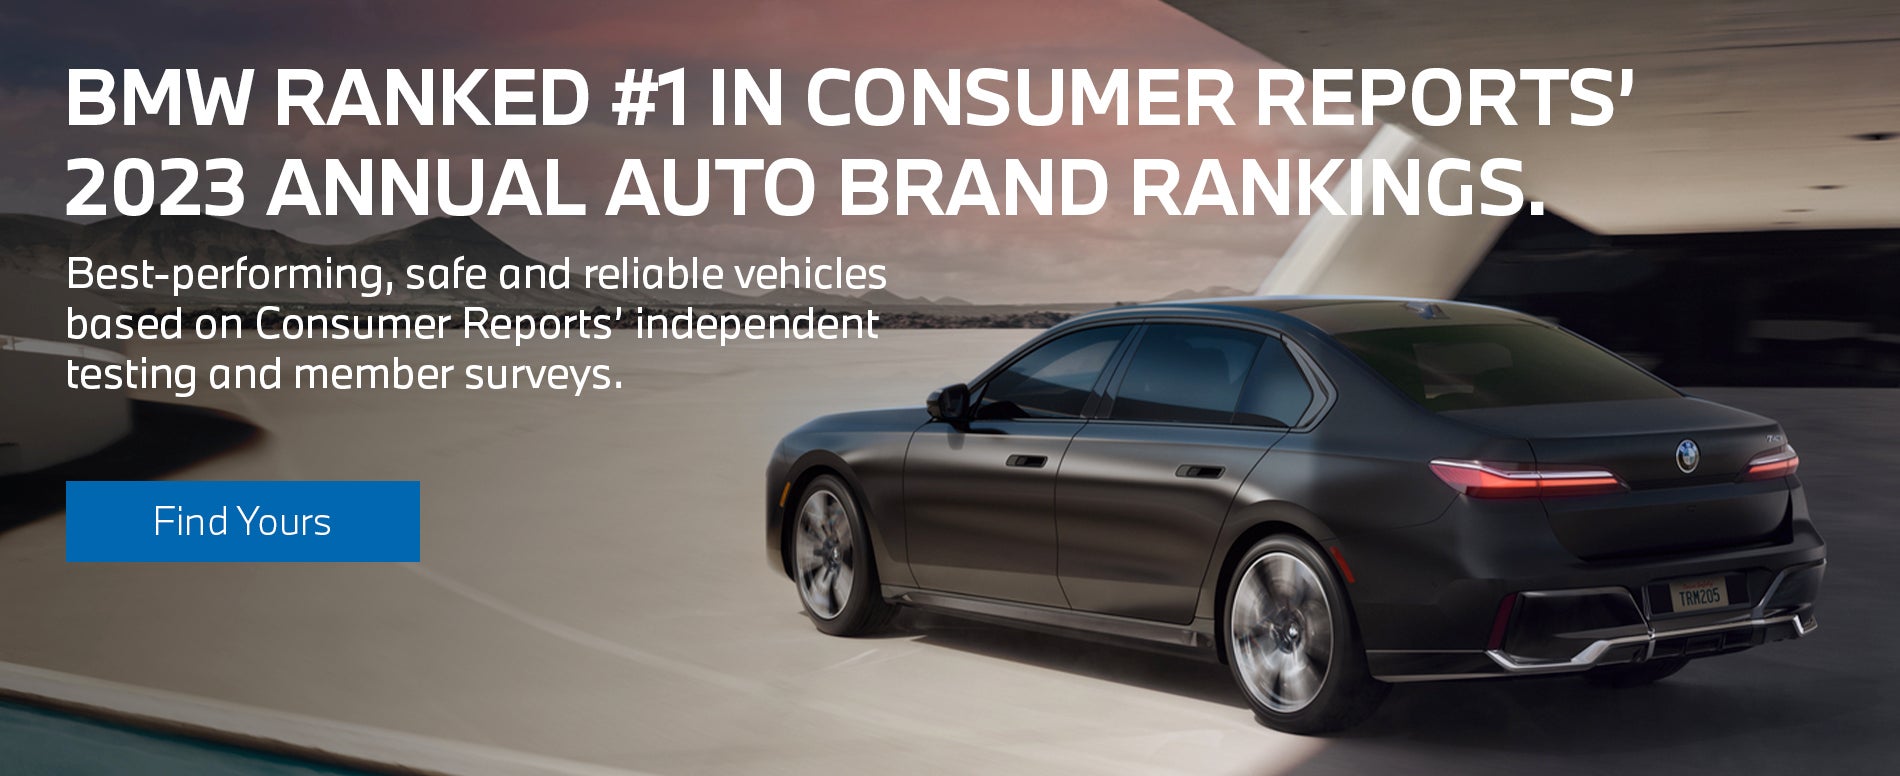 BMW RANKED #1 IN CONSUMER REPORTS'